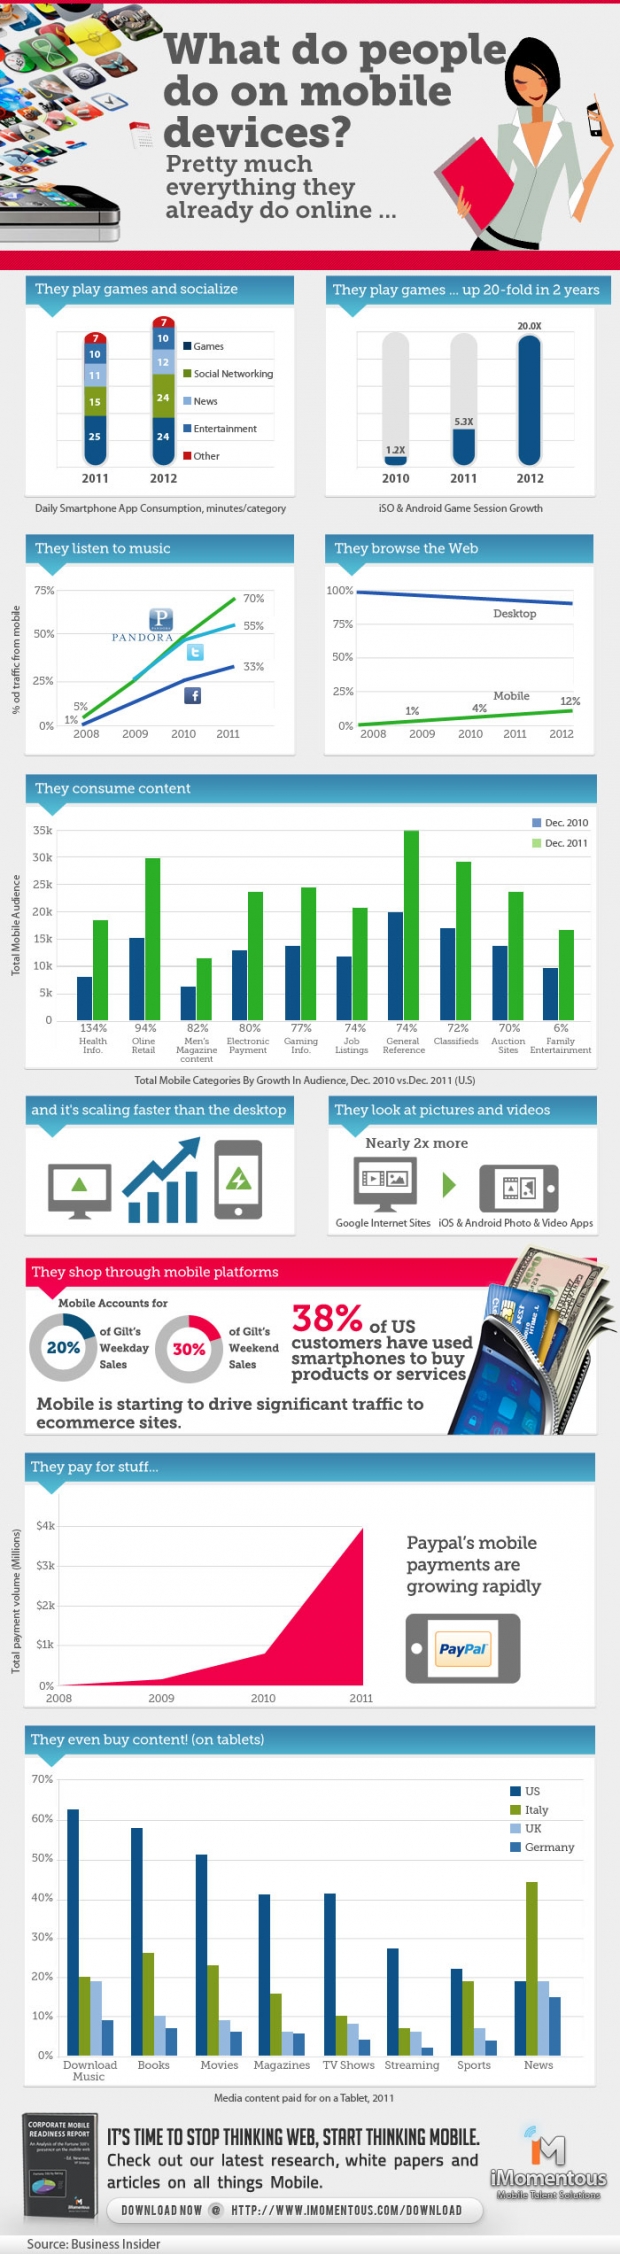 What do people do on mobile devices - infographic